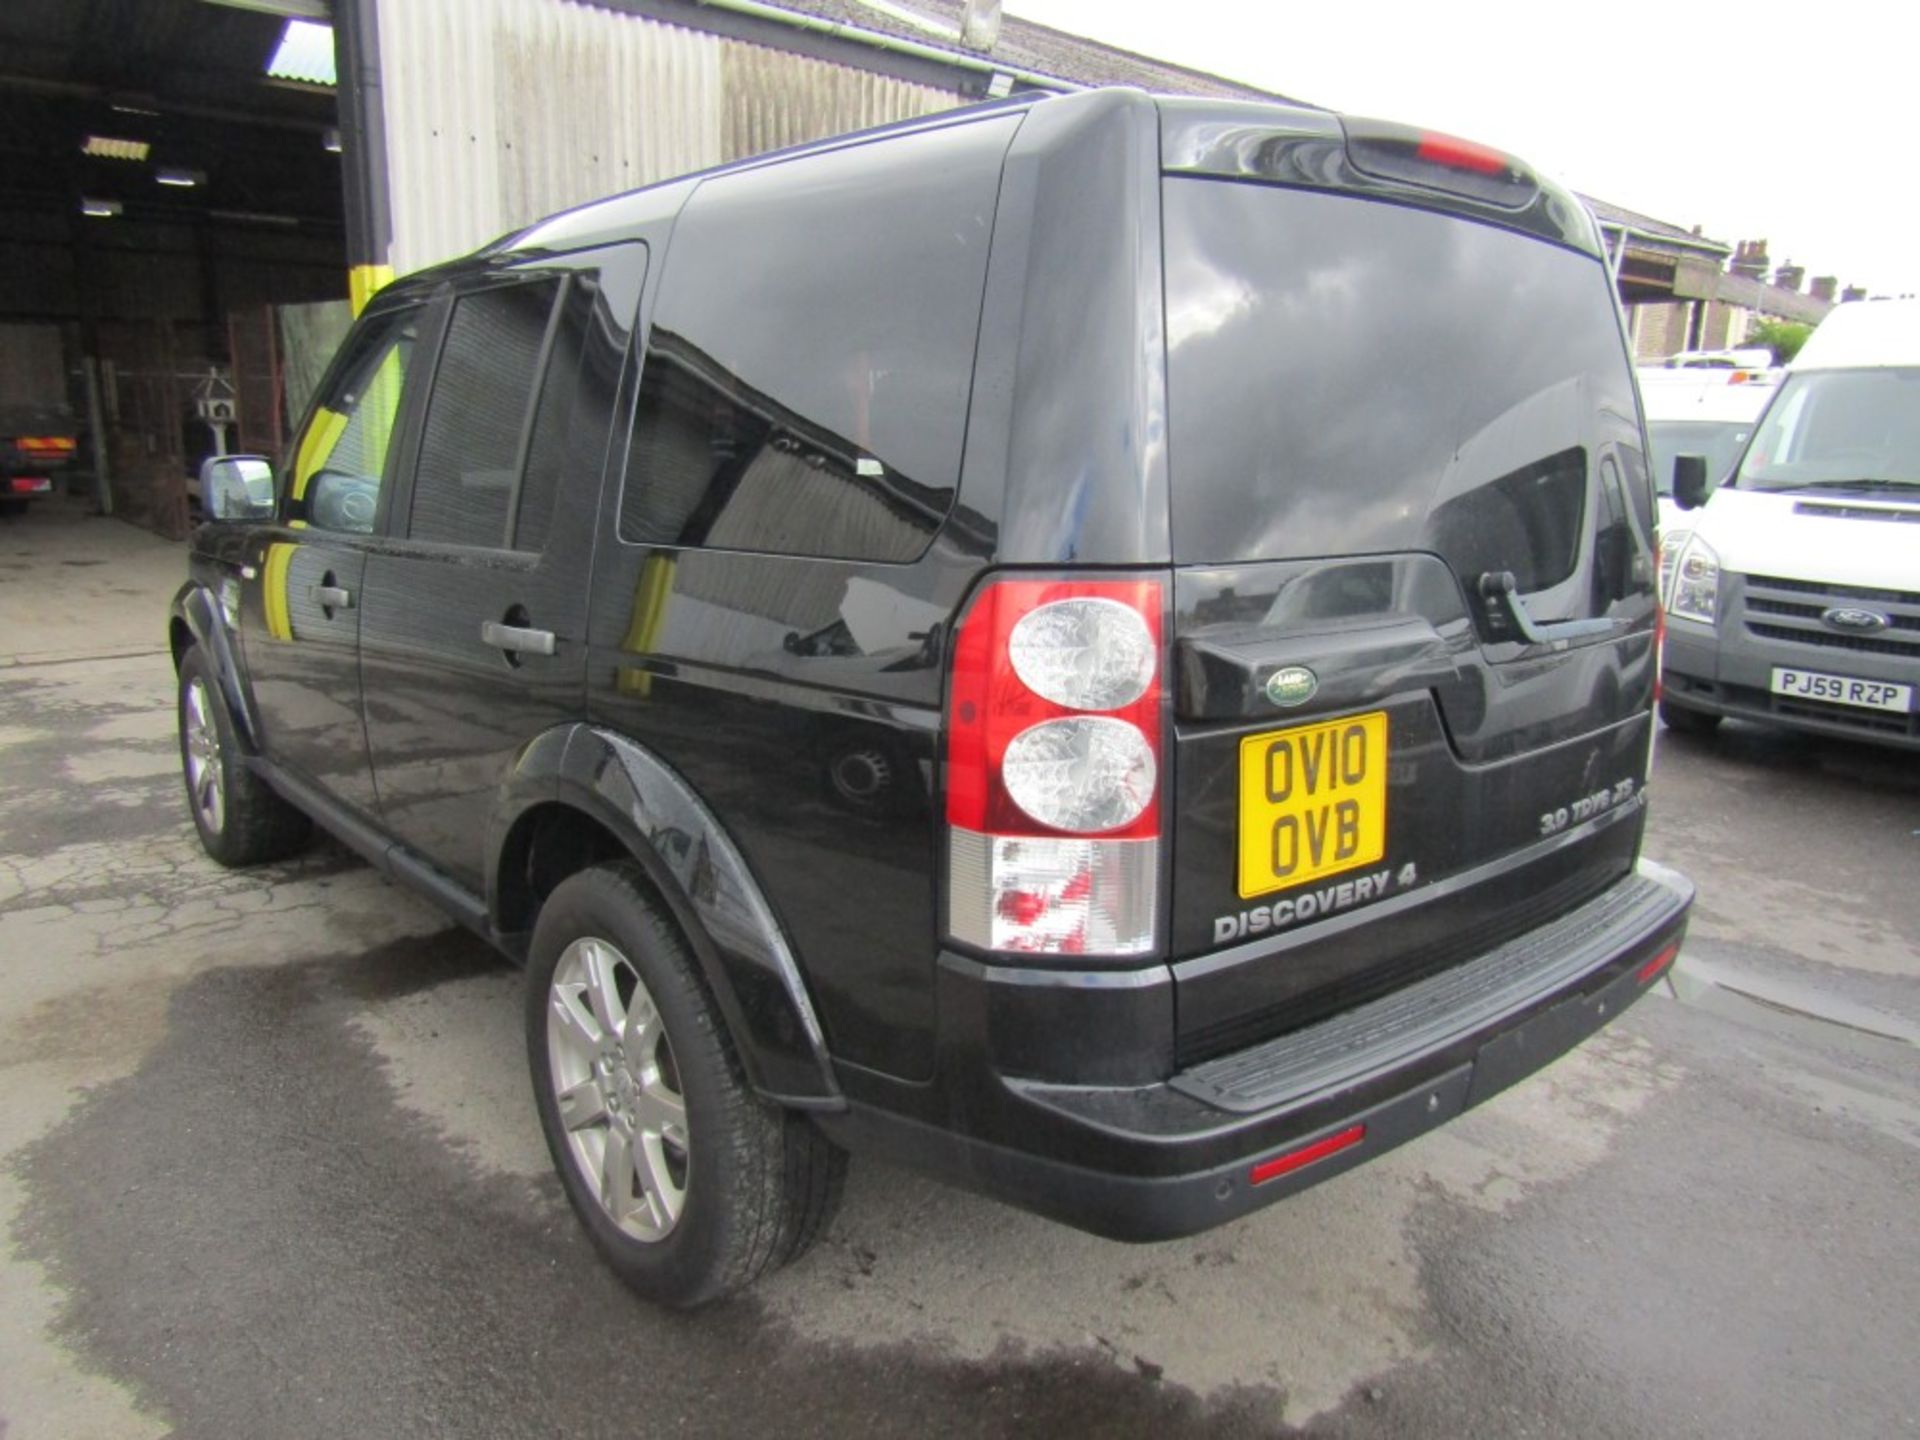 10 reg LAND ROVER DISCOVERY XS TDV6 AUTO, 1ST REG 05/10, 136631M, V5 HERE, 3 FORMER KEEPERS [NO - Bild 3 aus 7